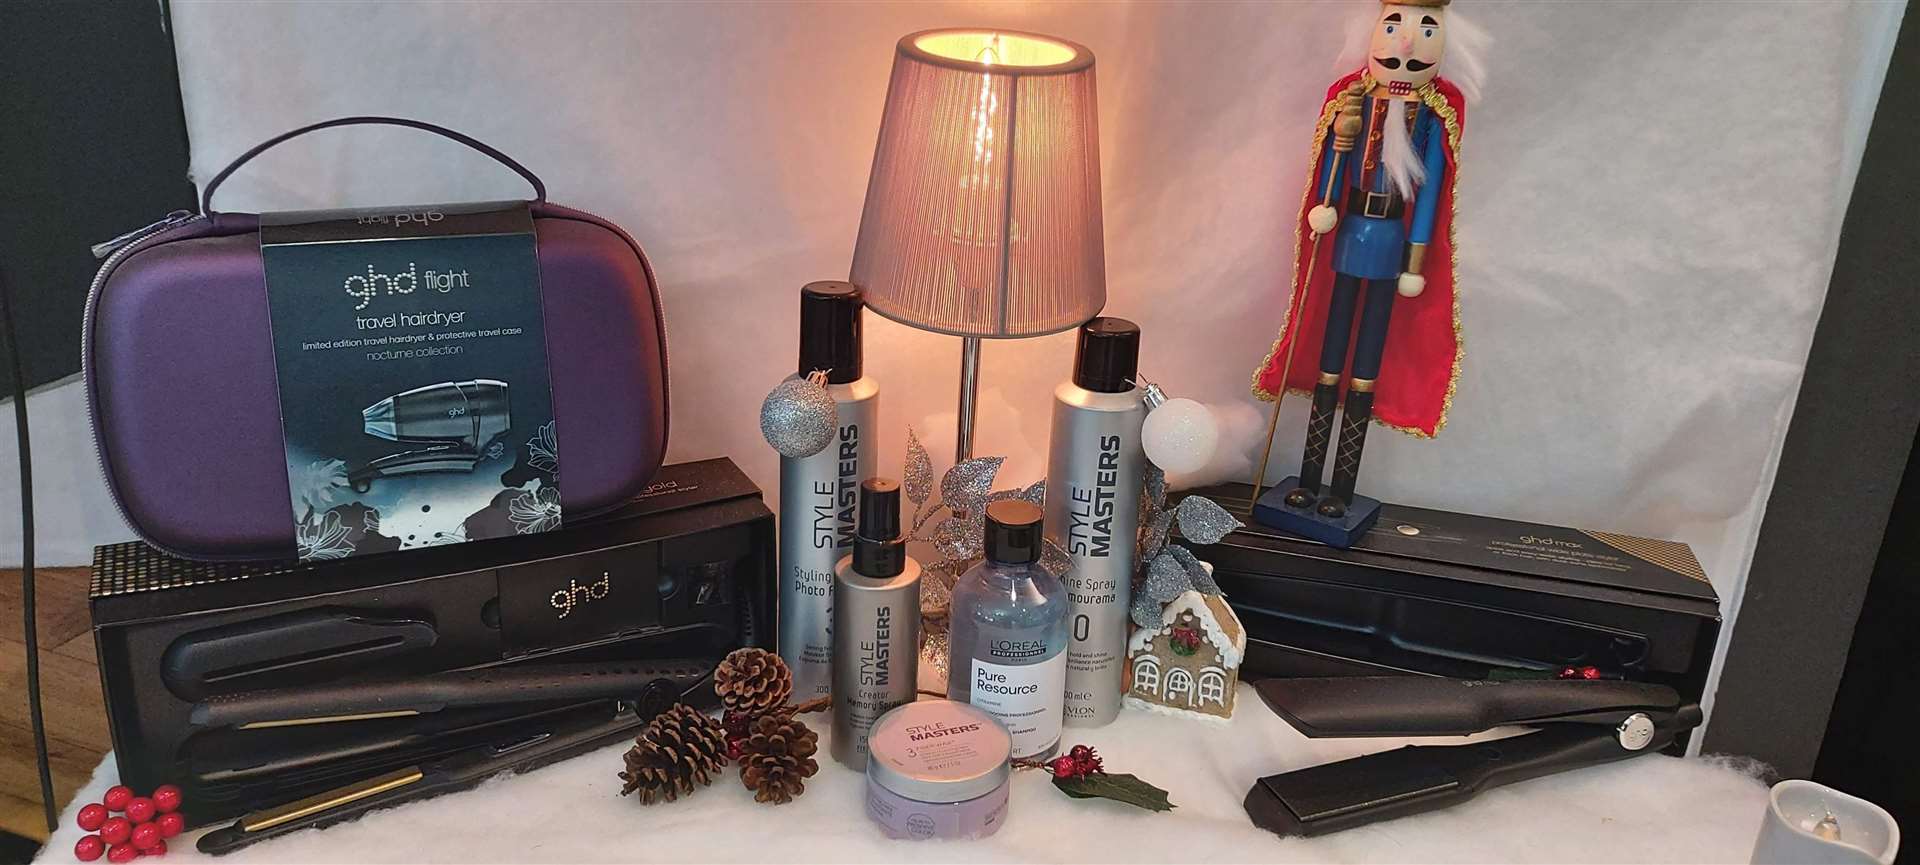 A pre-Christmas display of GHD products at the Mark Mardell trade fair